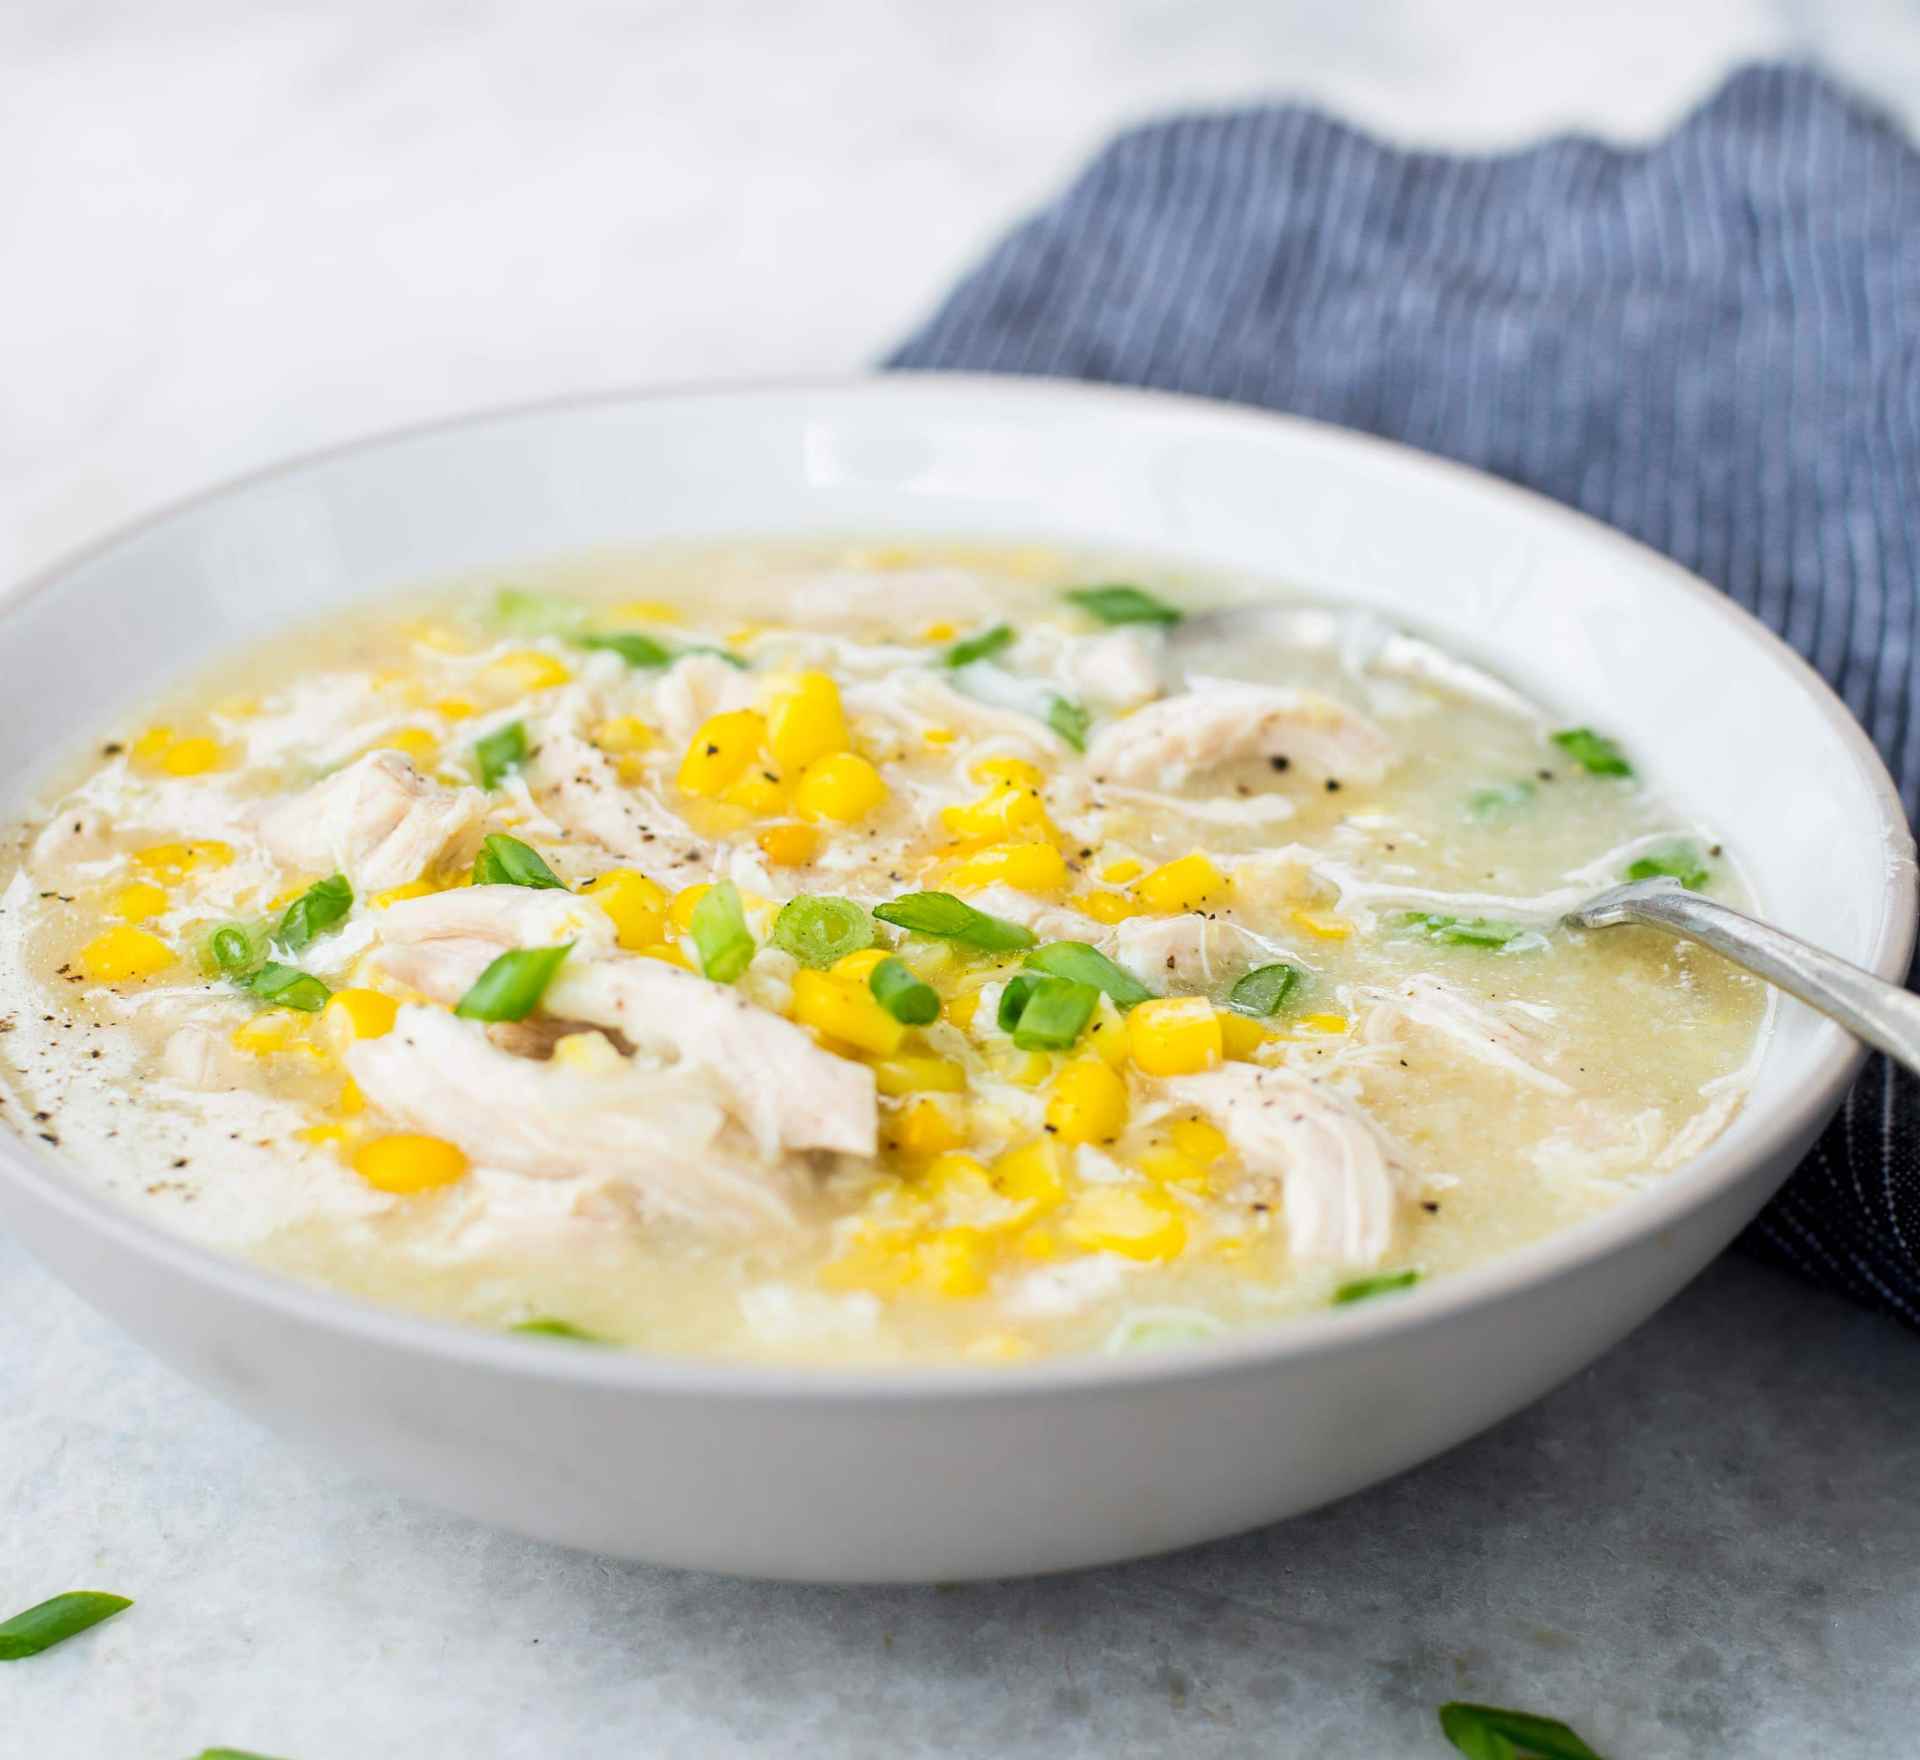 Top 15 Most Shared Sweetcorn Chicken soup – Easy Recipes To Make at Home